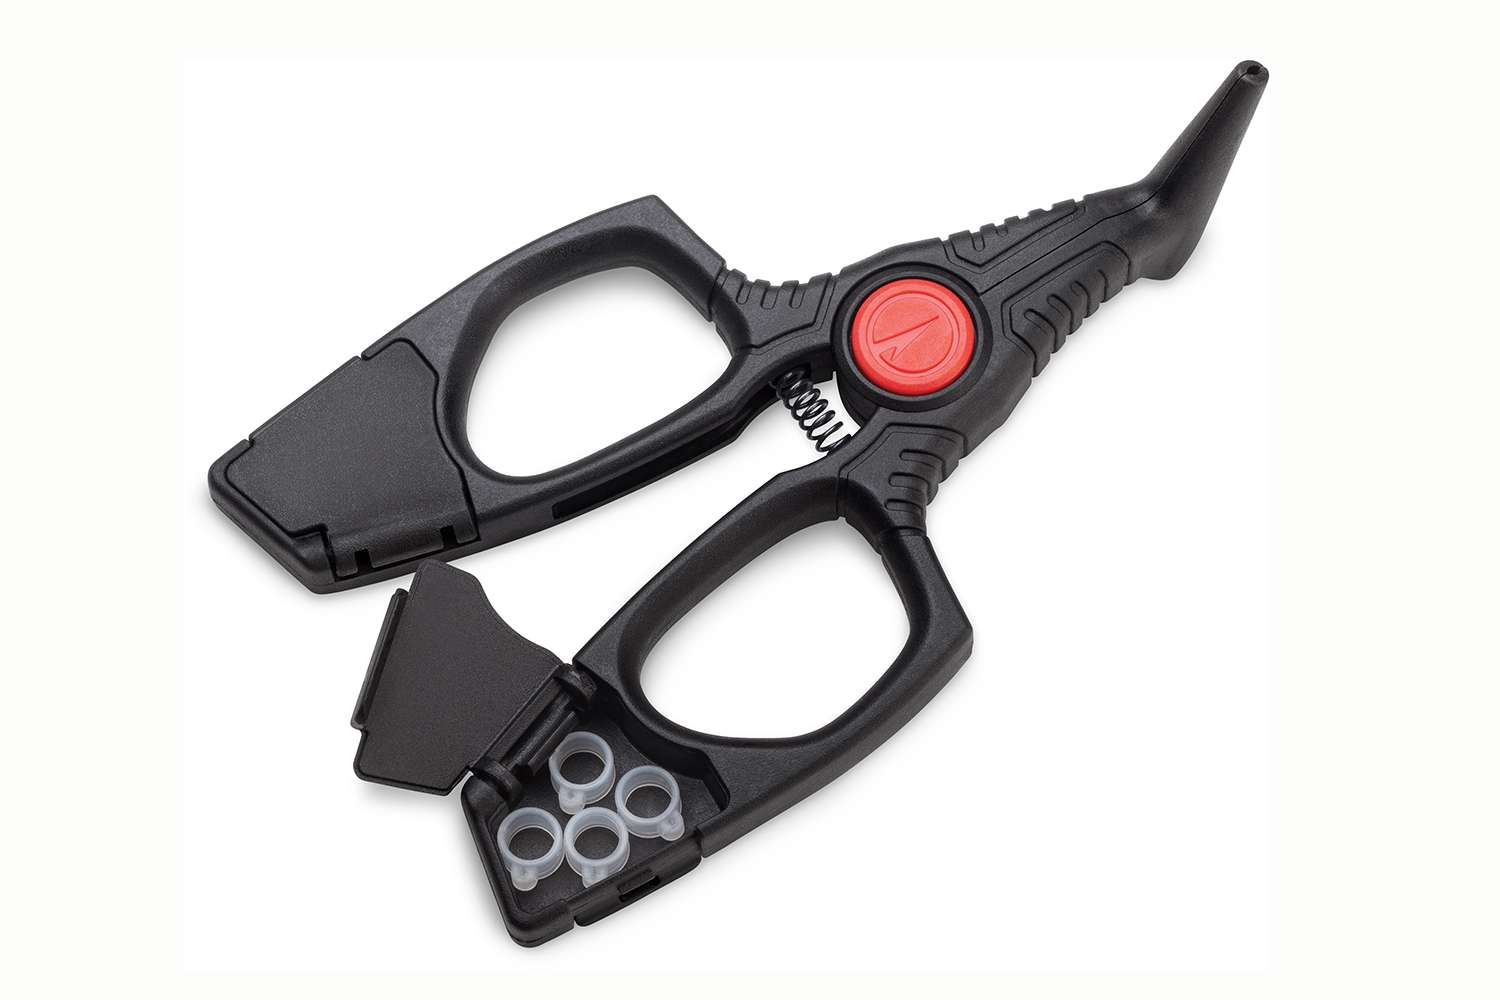 <p><b>VMC Crossover Pliers </b></p>
<p>These pliers paired with the Crossover Rings will take wacky/neko rigging to the next level! No more fussing with O-rings that donât fit properly or watching your plastics fly off while a fish jumps. These pliers are made of a lightweight and durable plastic and feature dual compartments in the handle for extra ring storage. Simply slide the ring onto the closed jaws, compress handle to stretch ring, slide your plastic into the ring and depress the pliers to leave a snug ring wherever preferred. </p>
<p><a href=